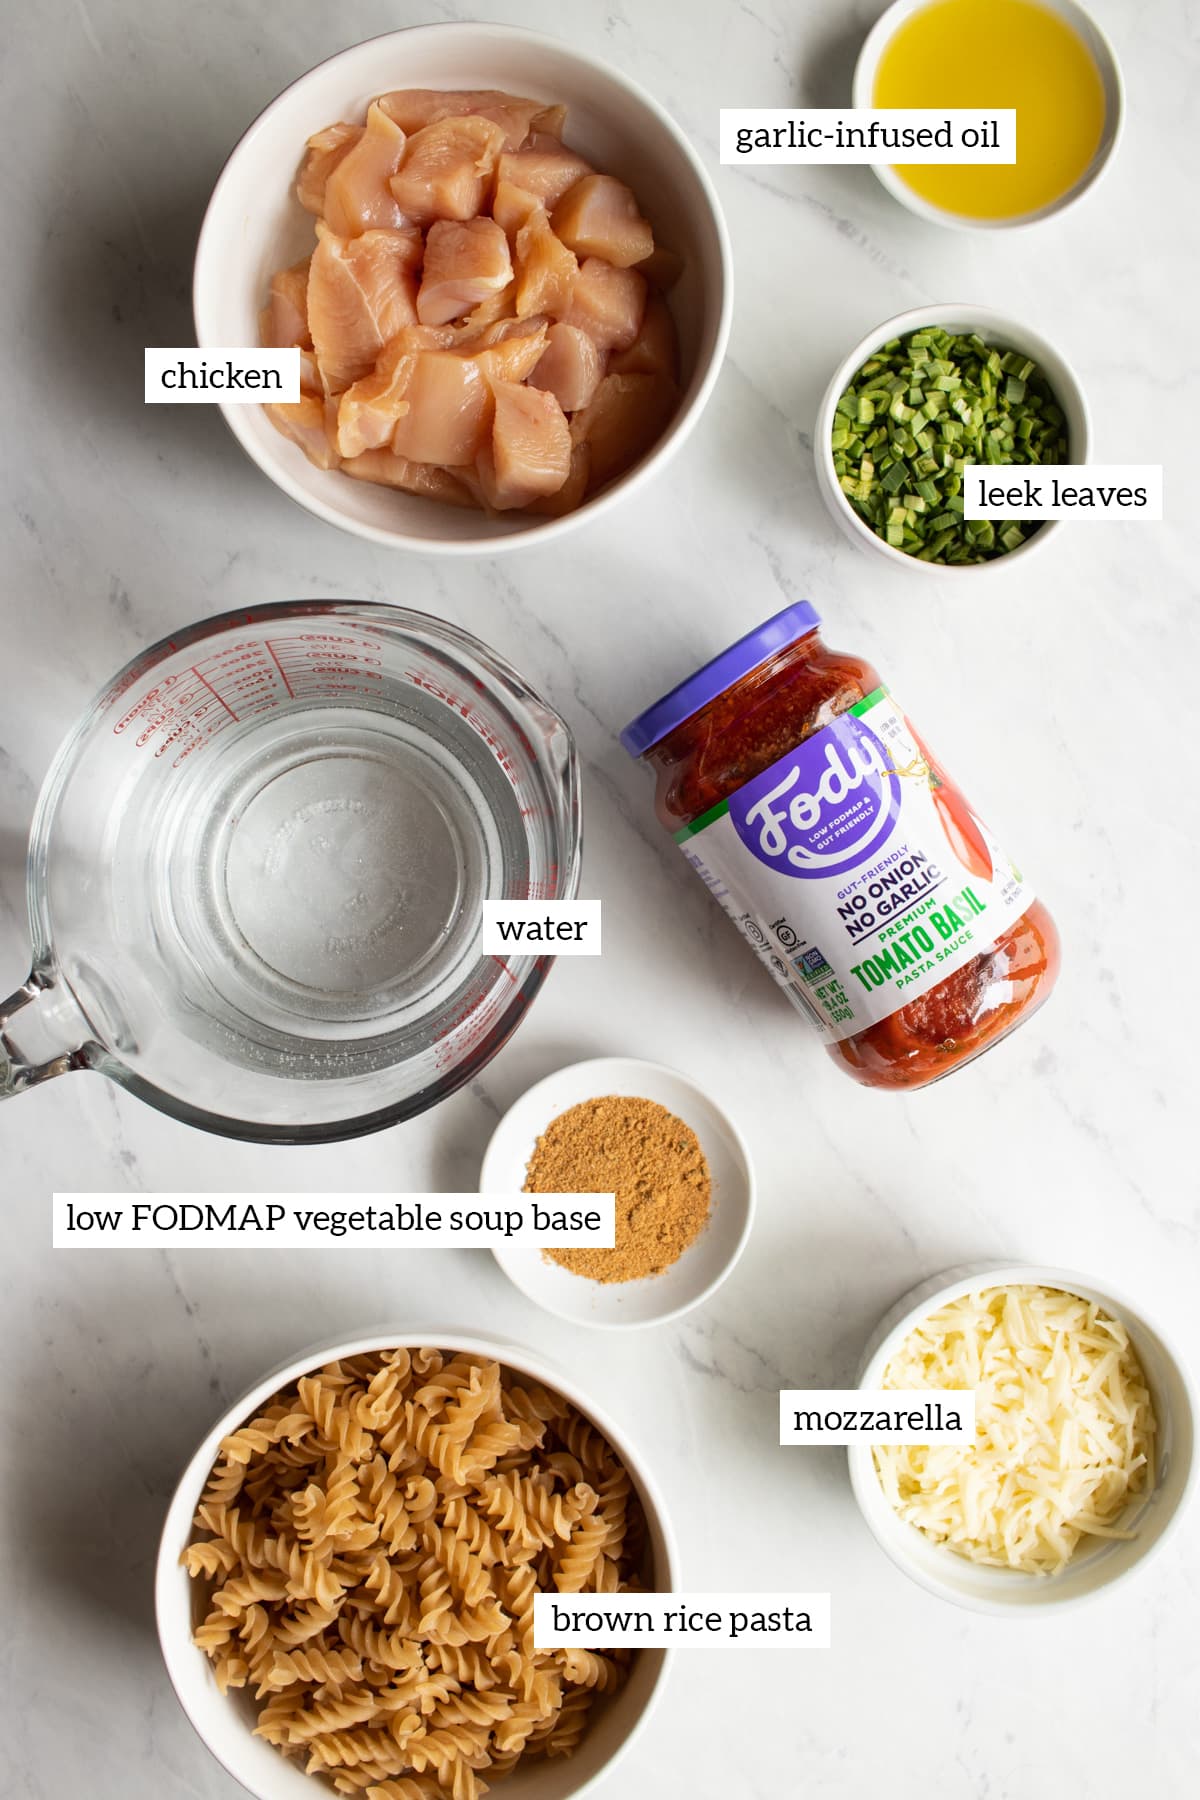 The ingredients needed to make this Instant Pot Low FODMAP Tomato-Basil Pasta are measured out into separate bowls on a marble countertop.